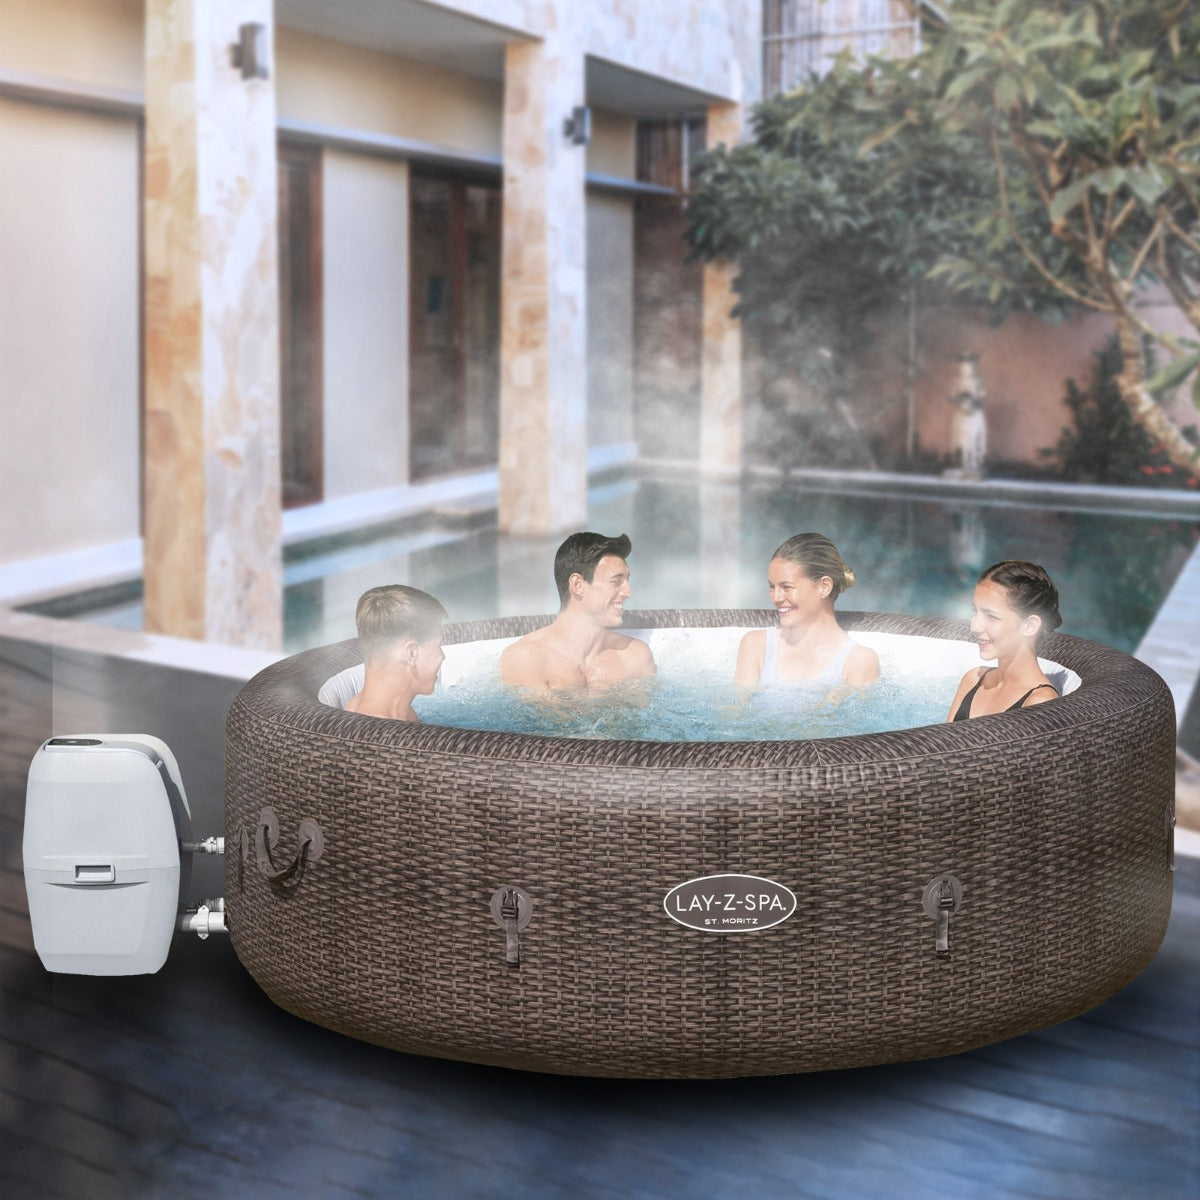 Heated Bestway Z St. | Hot Moritz Outbax Spa Gigantic! Lay Tub